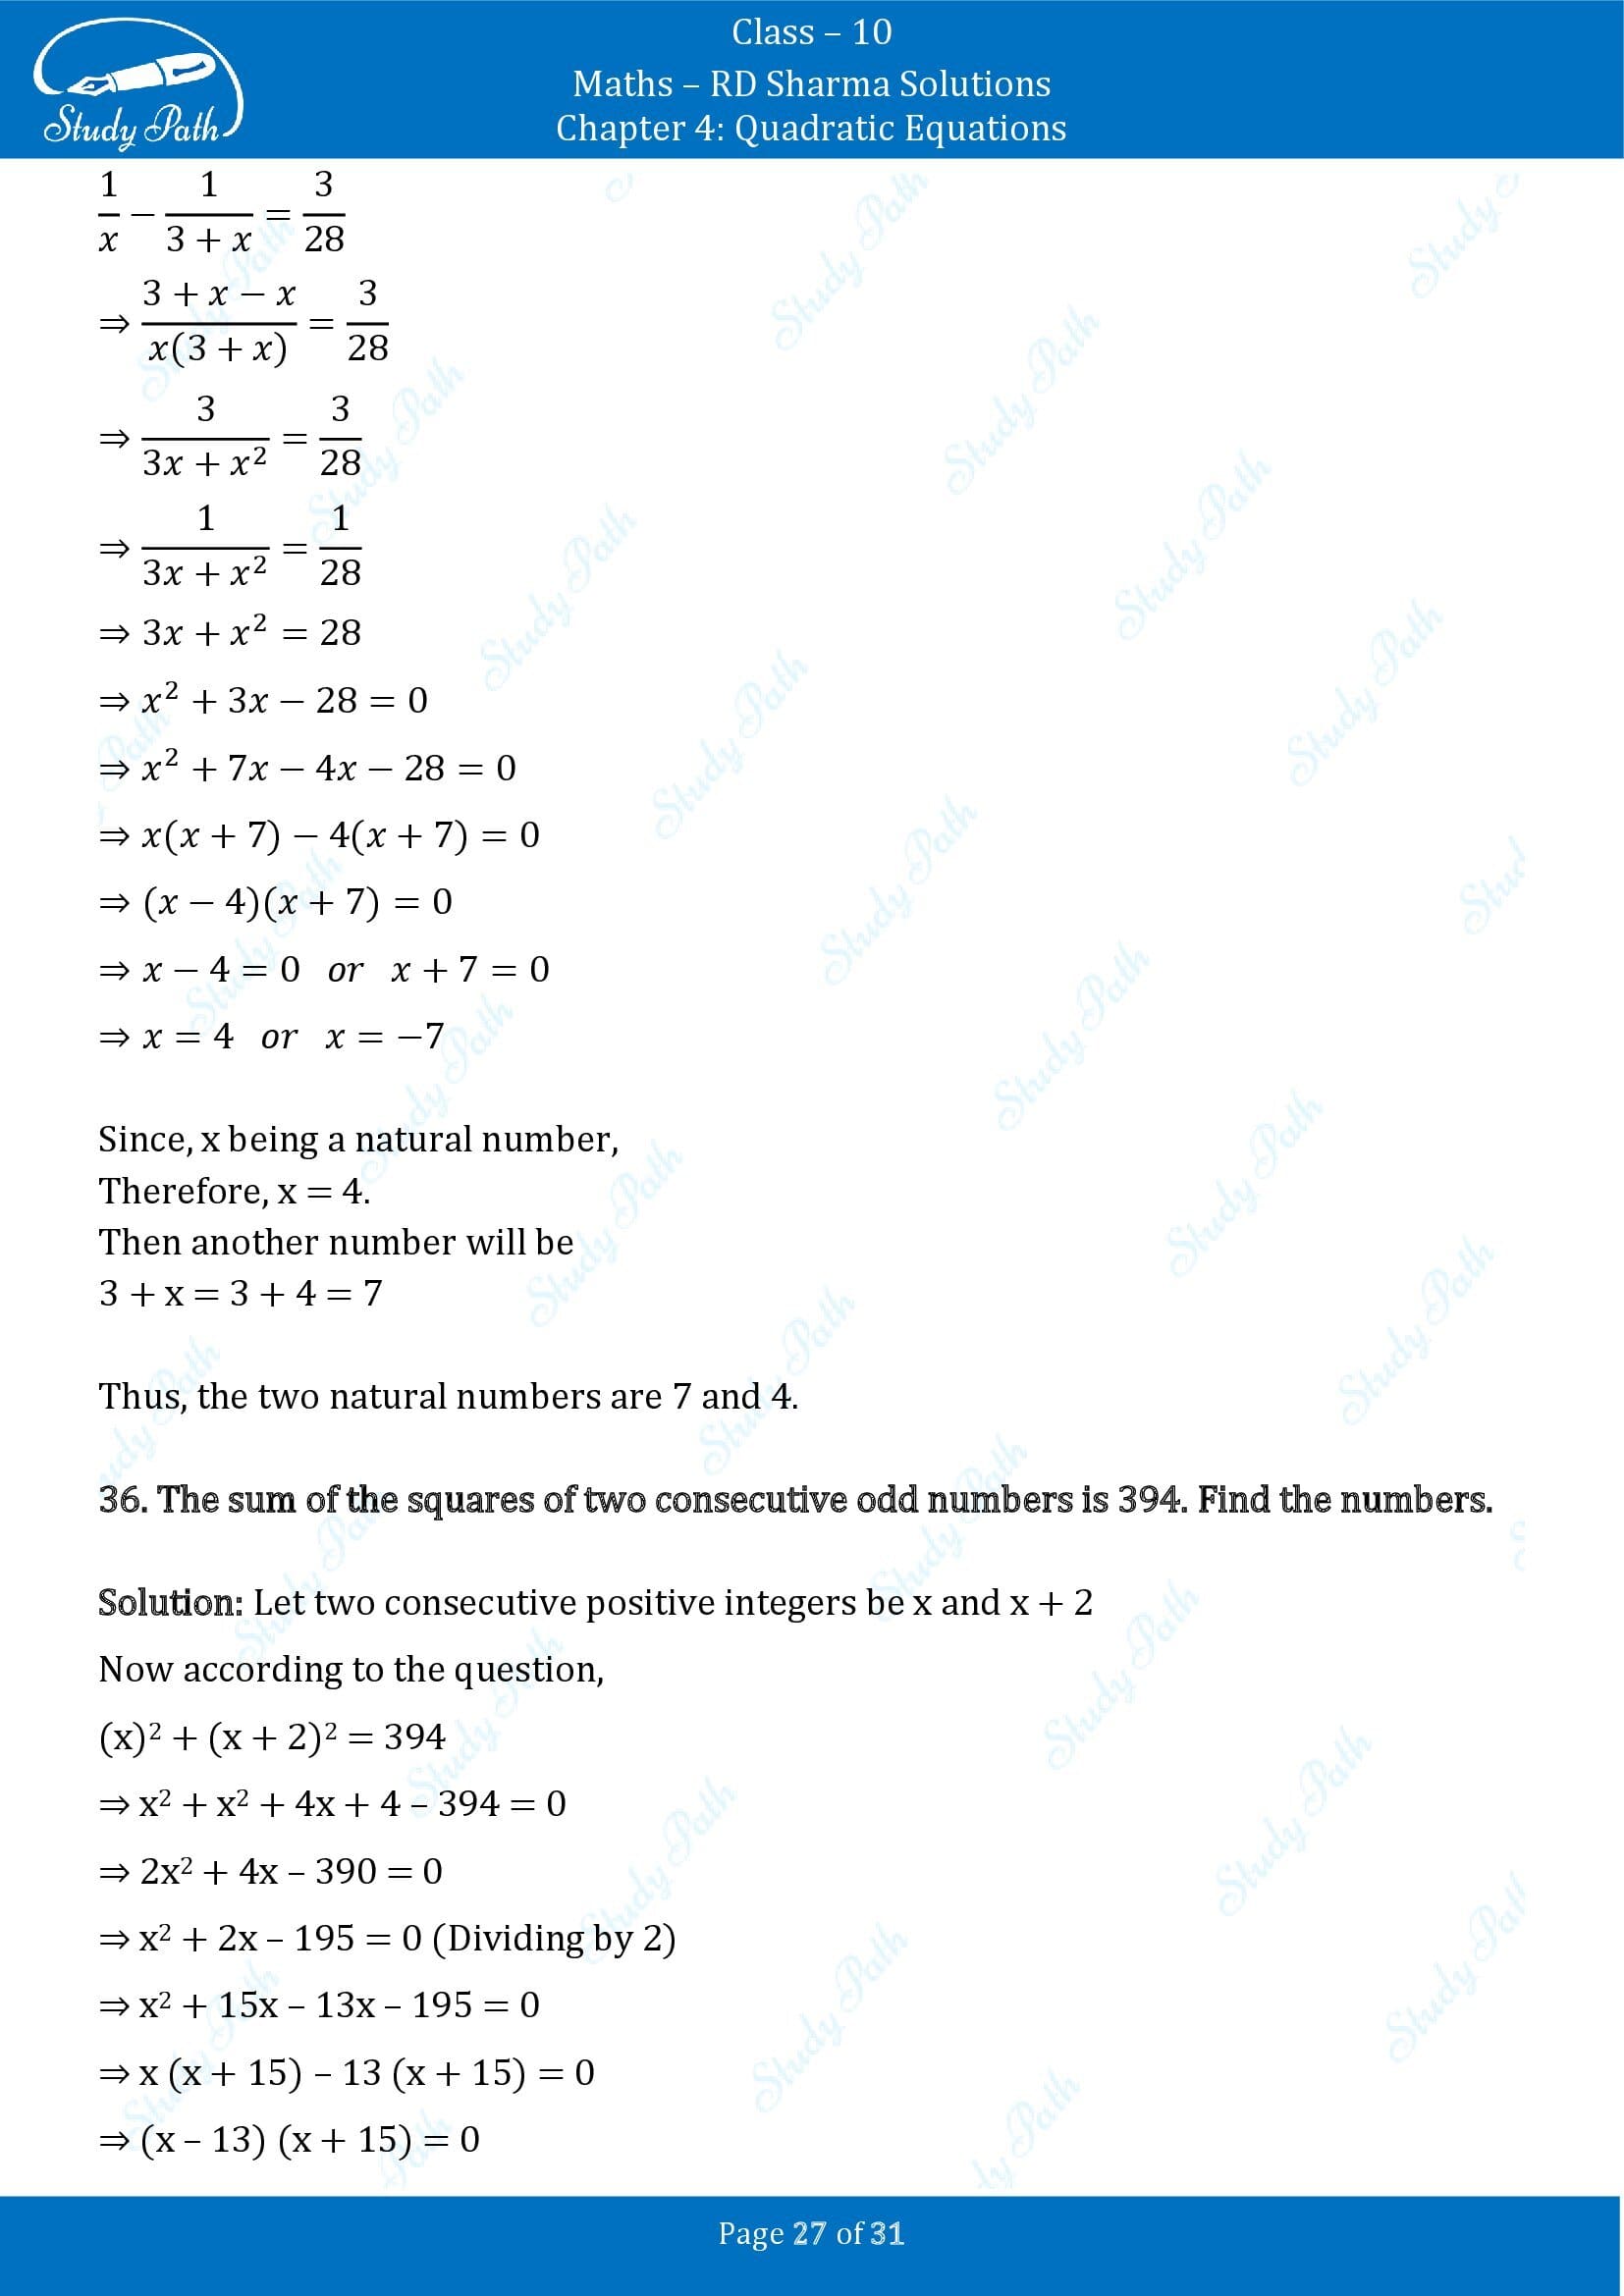 RD Sharma Solutions Class 10 Chapter 4 Quadratic Equations Exercise 4.7 00027